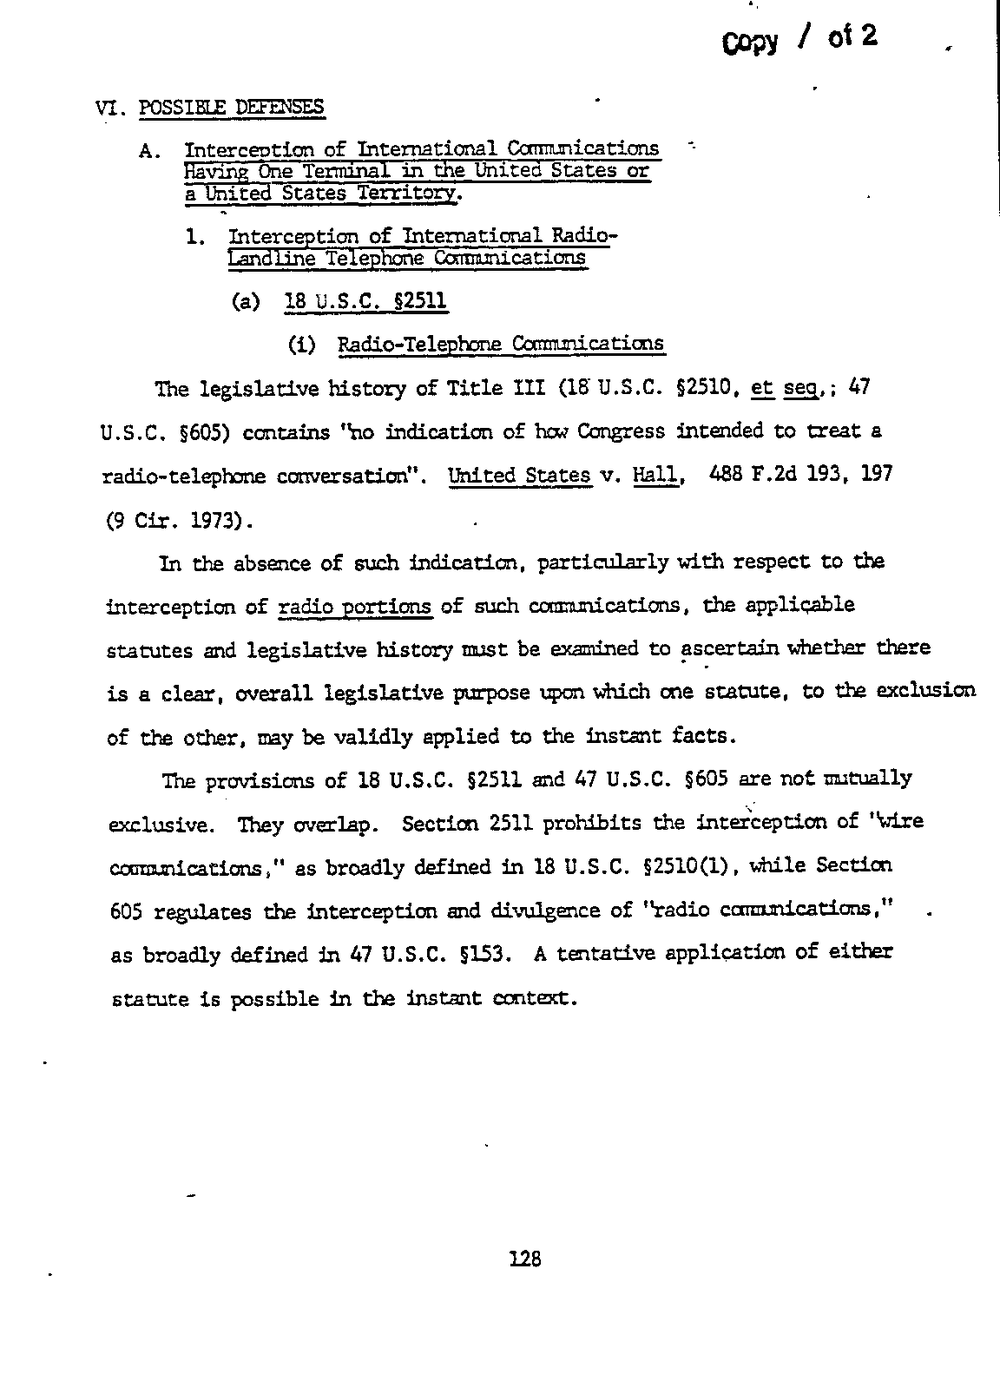 Page 136 from Report on Inquiry Into CIA Related Electronic Surveillance Activities